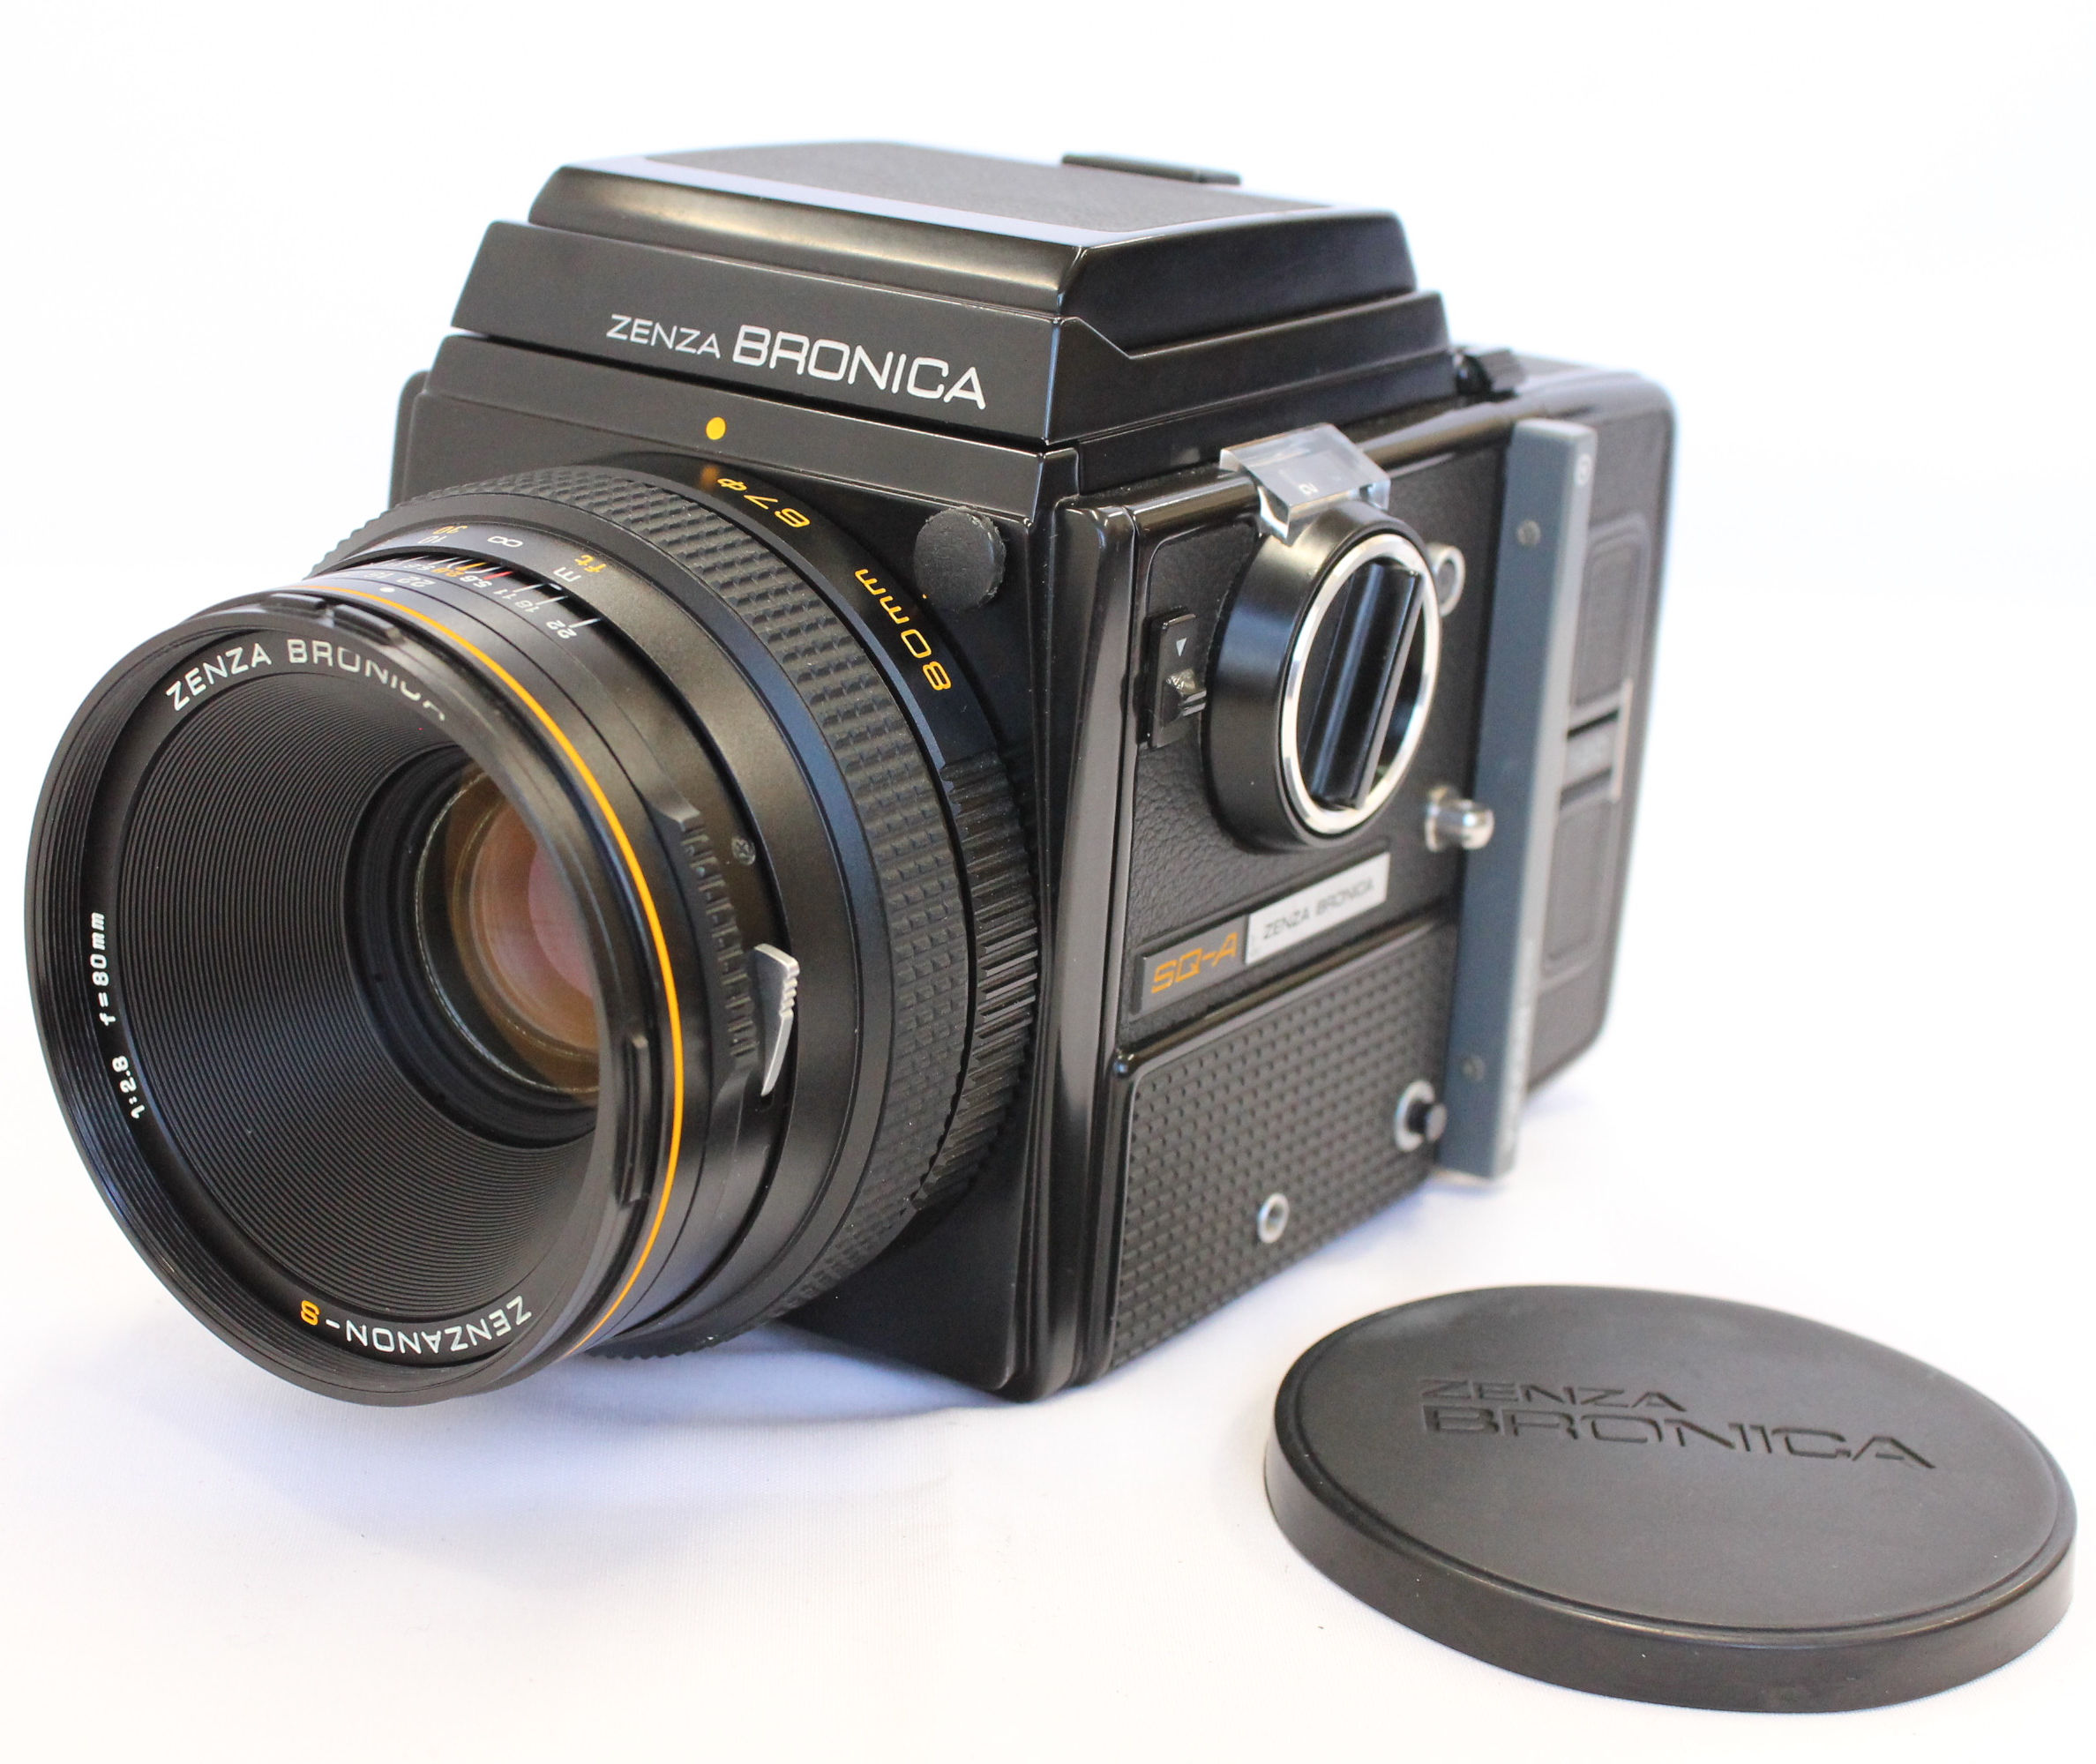 Japan Used Camera Shop | [Near Mint] ZENZA BRONICA SQ-A w/Zenzanon-S 80mm F2.8 Lens from Japan